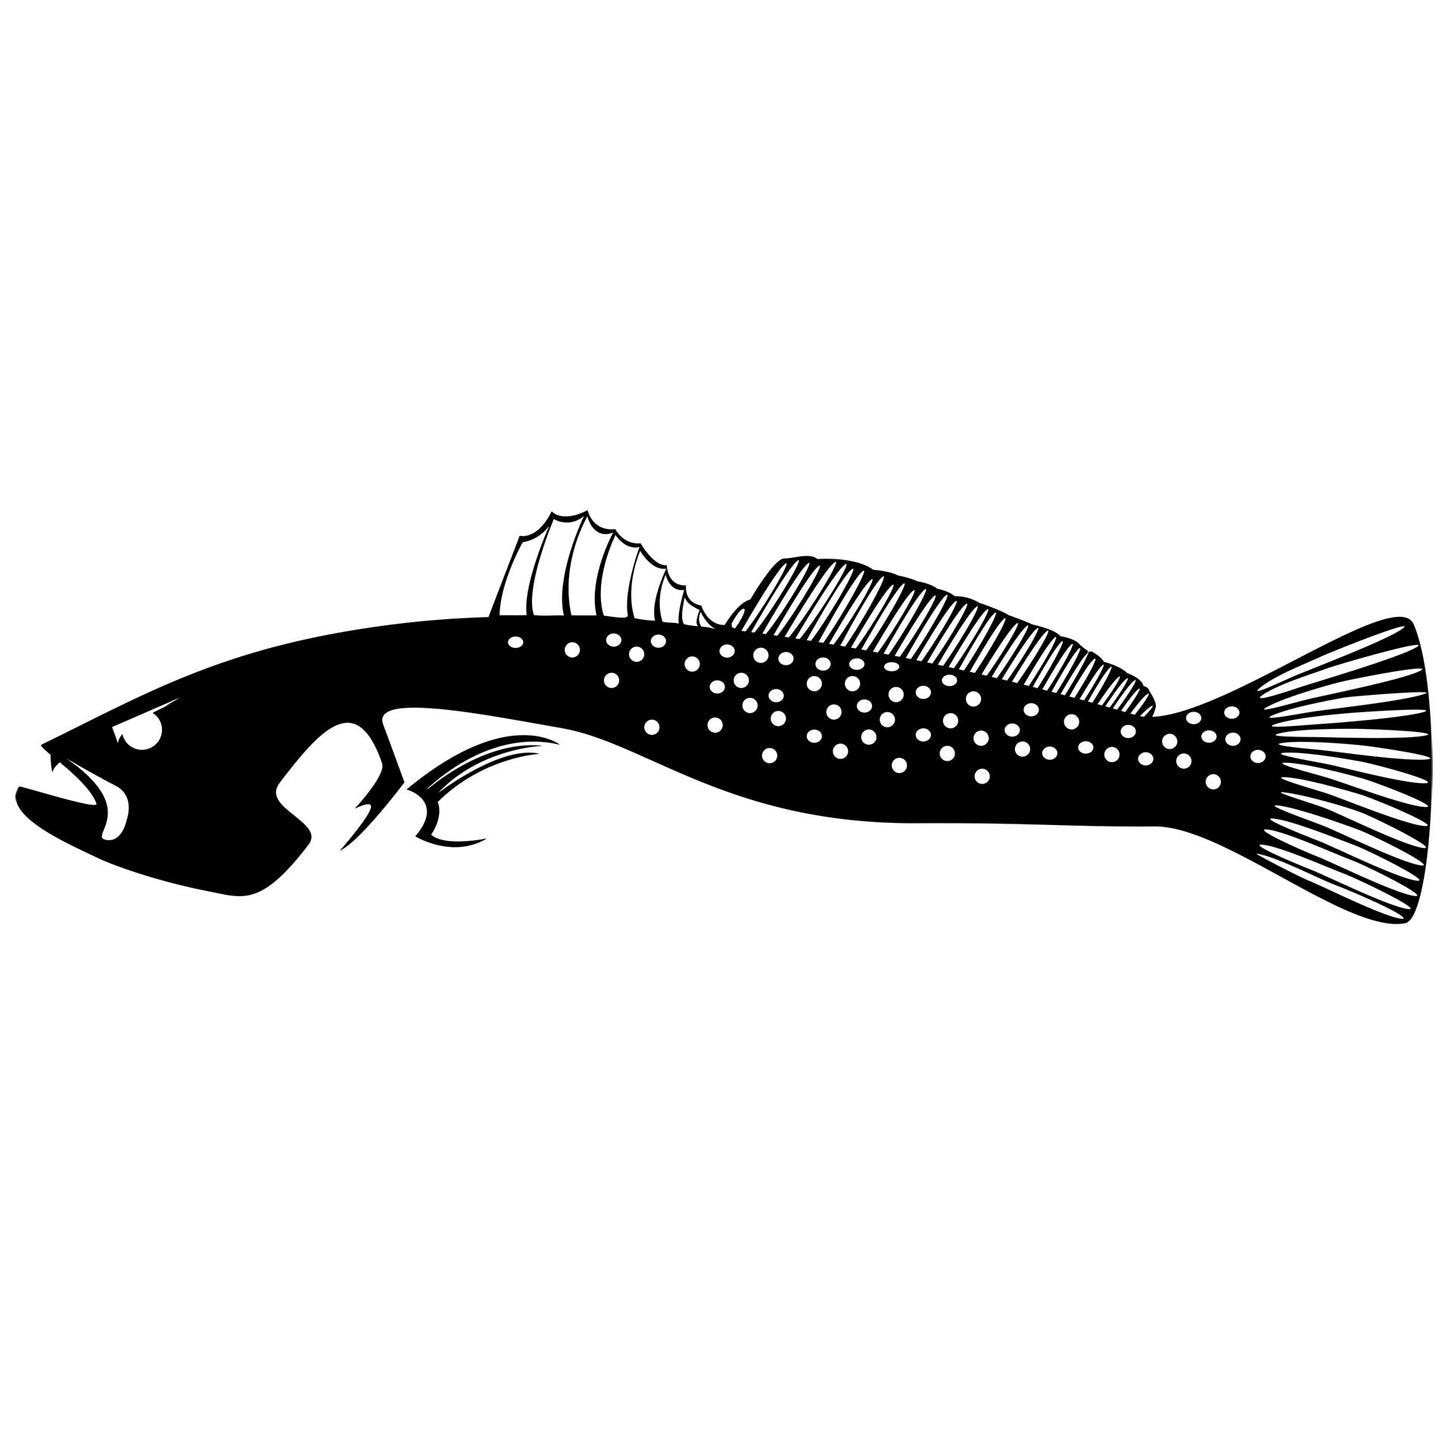 Skiff Life Sea Trout Fishing Stickers - Seatrout UV Protected Car Decals Waterproof Fish Stickers Yeti Decals for Boat Kayak Truck Yeti Tumbler Car Laptop Decor Full Tail - Skiff Life